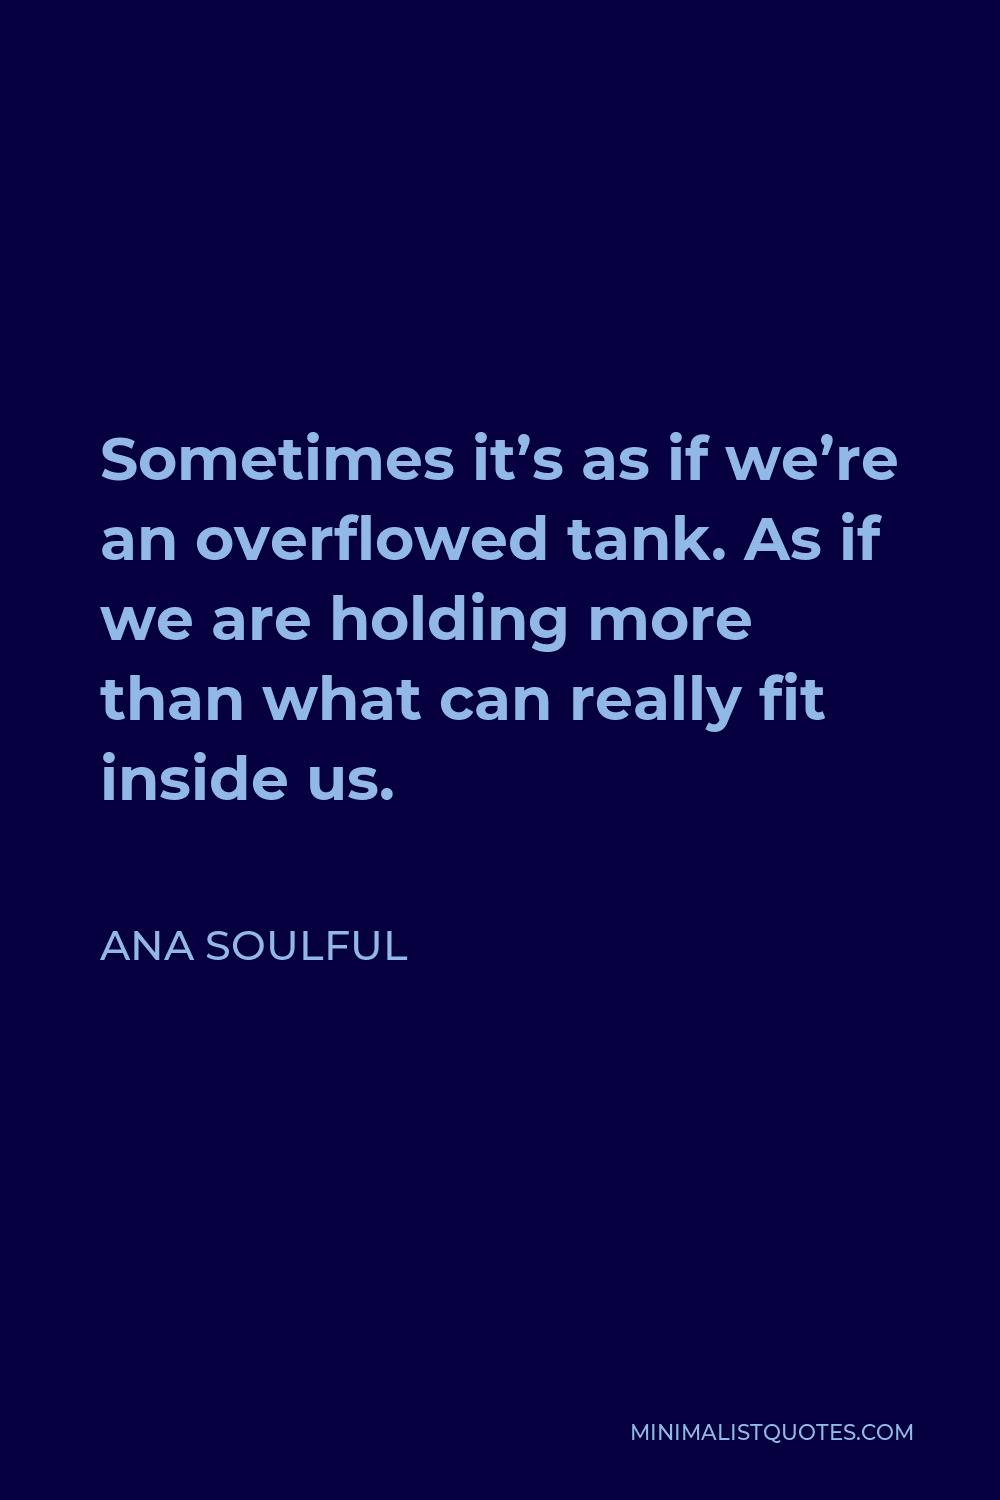 Ana Soulful Quote - Sometimes it’s as if we’re an overflowed tank. As if we are holding more than what can really fit inside us.